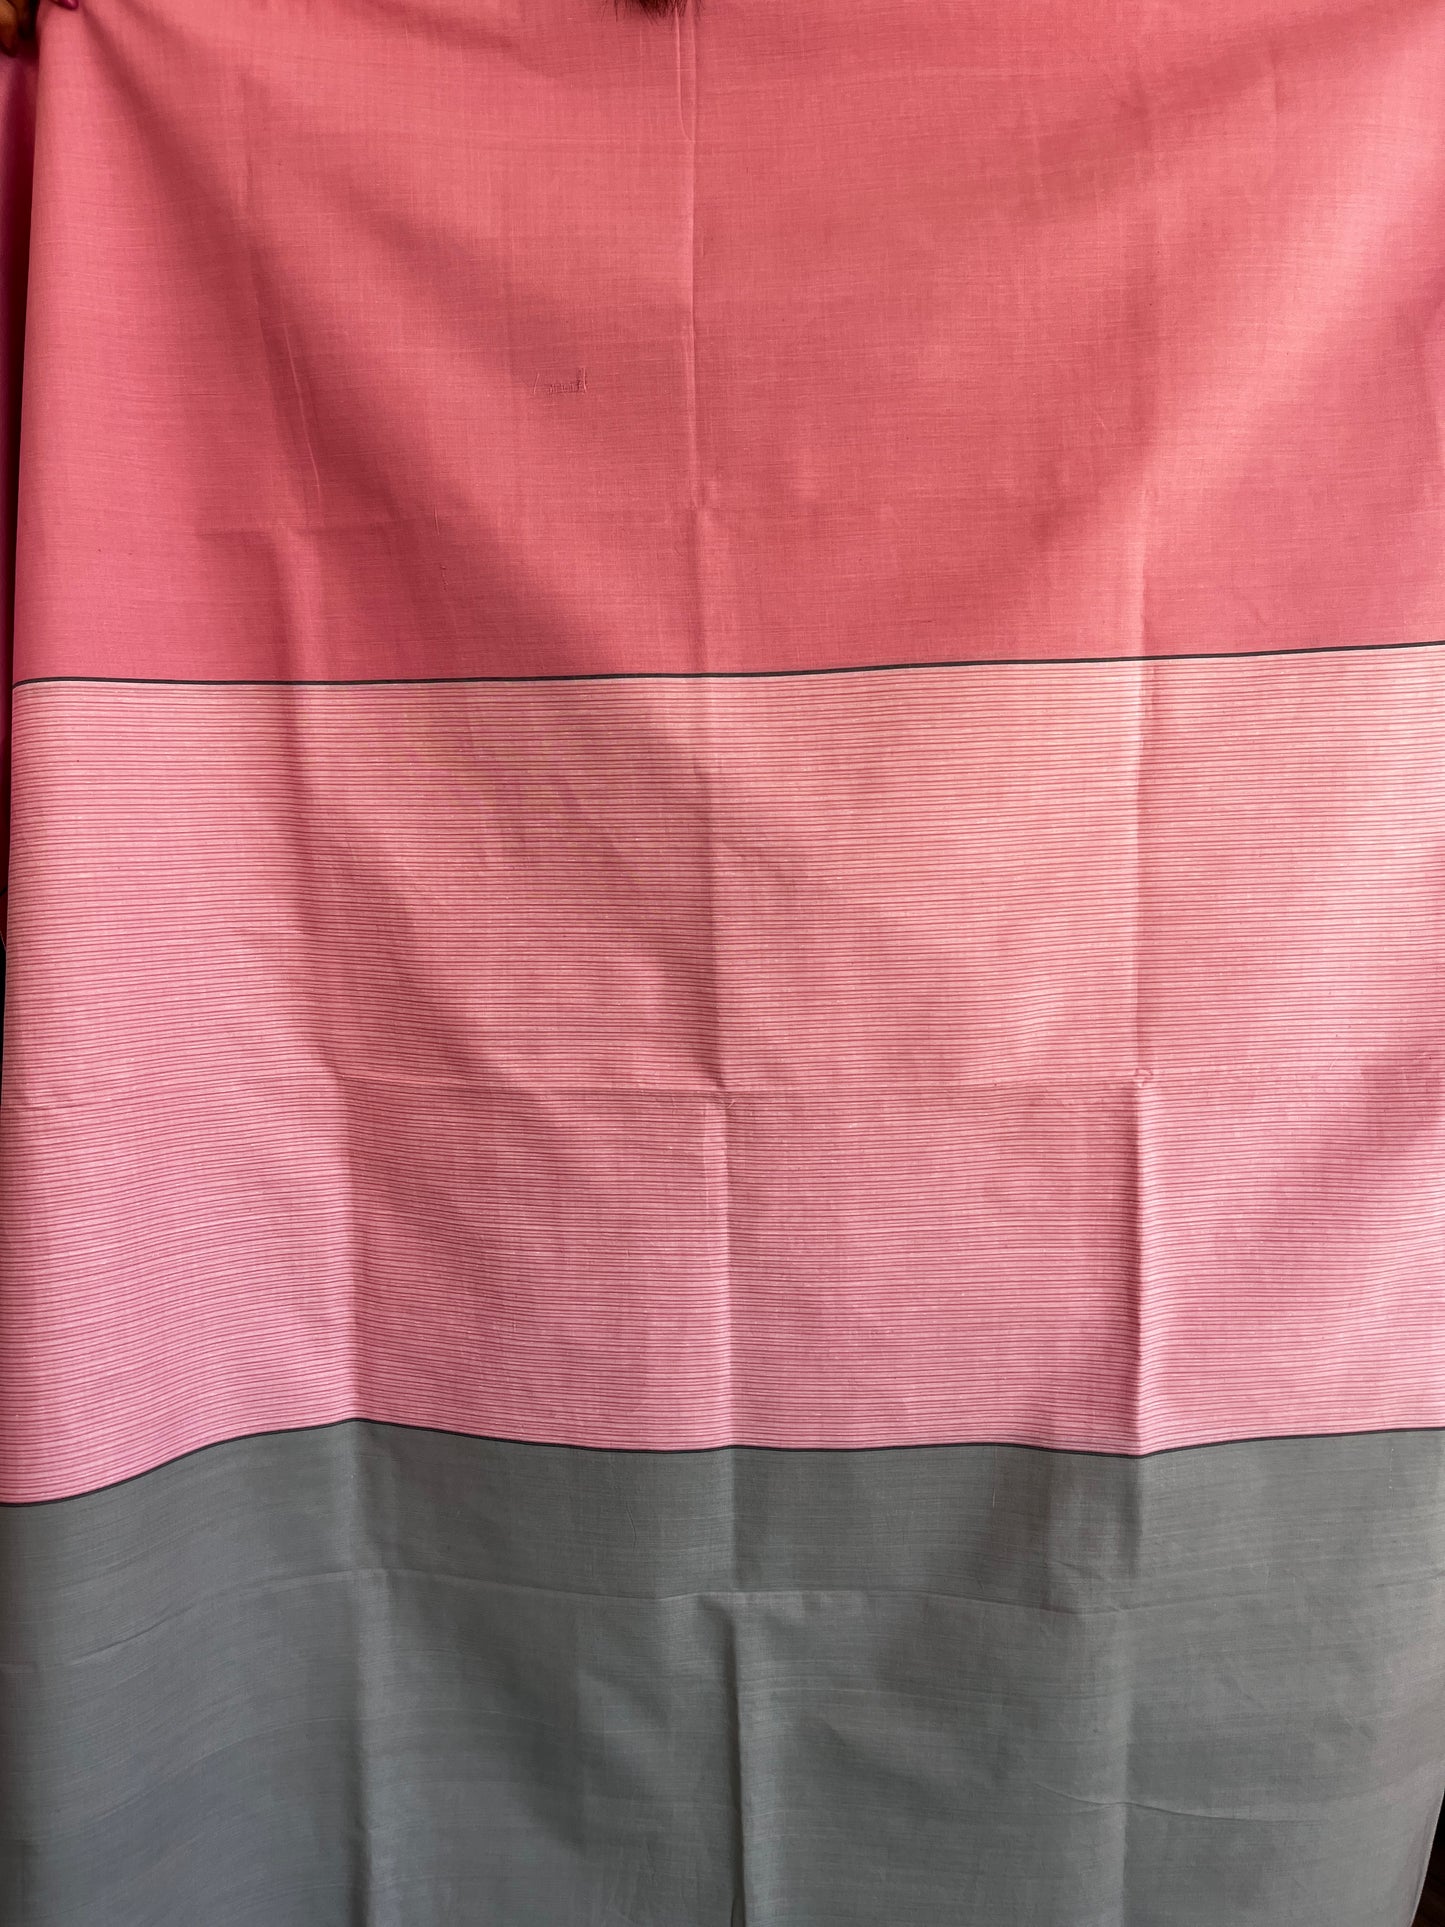 One-of-a-Kind Handloom Cotton Fabric - Pink Grey Contrast